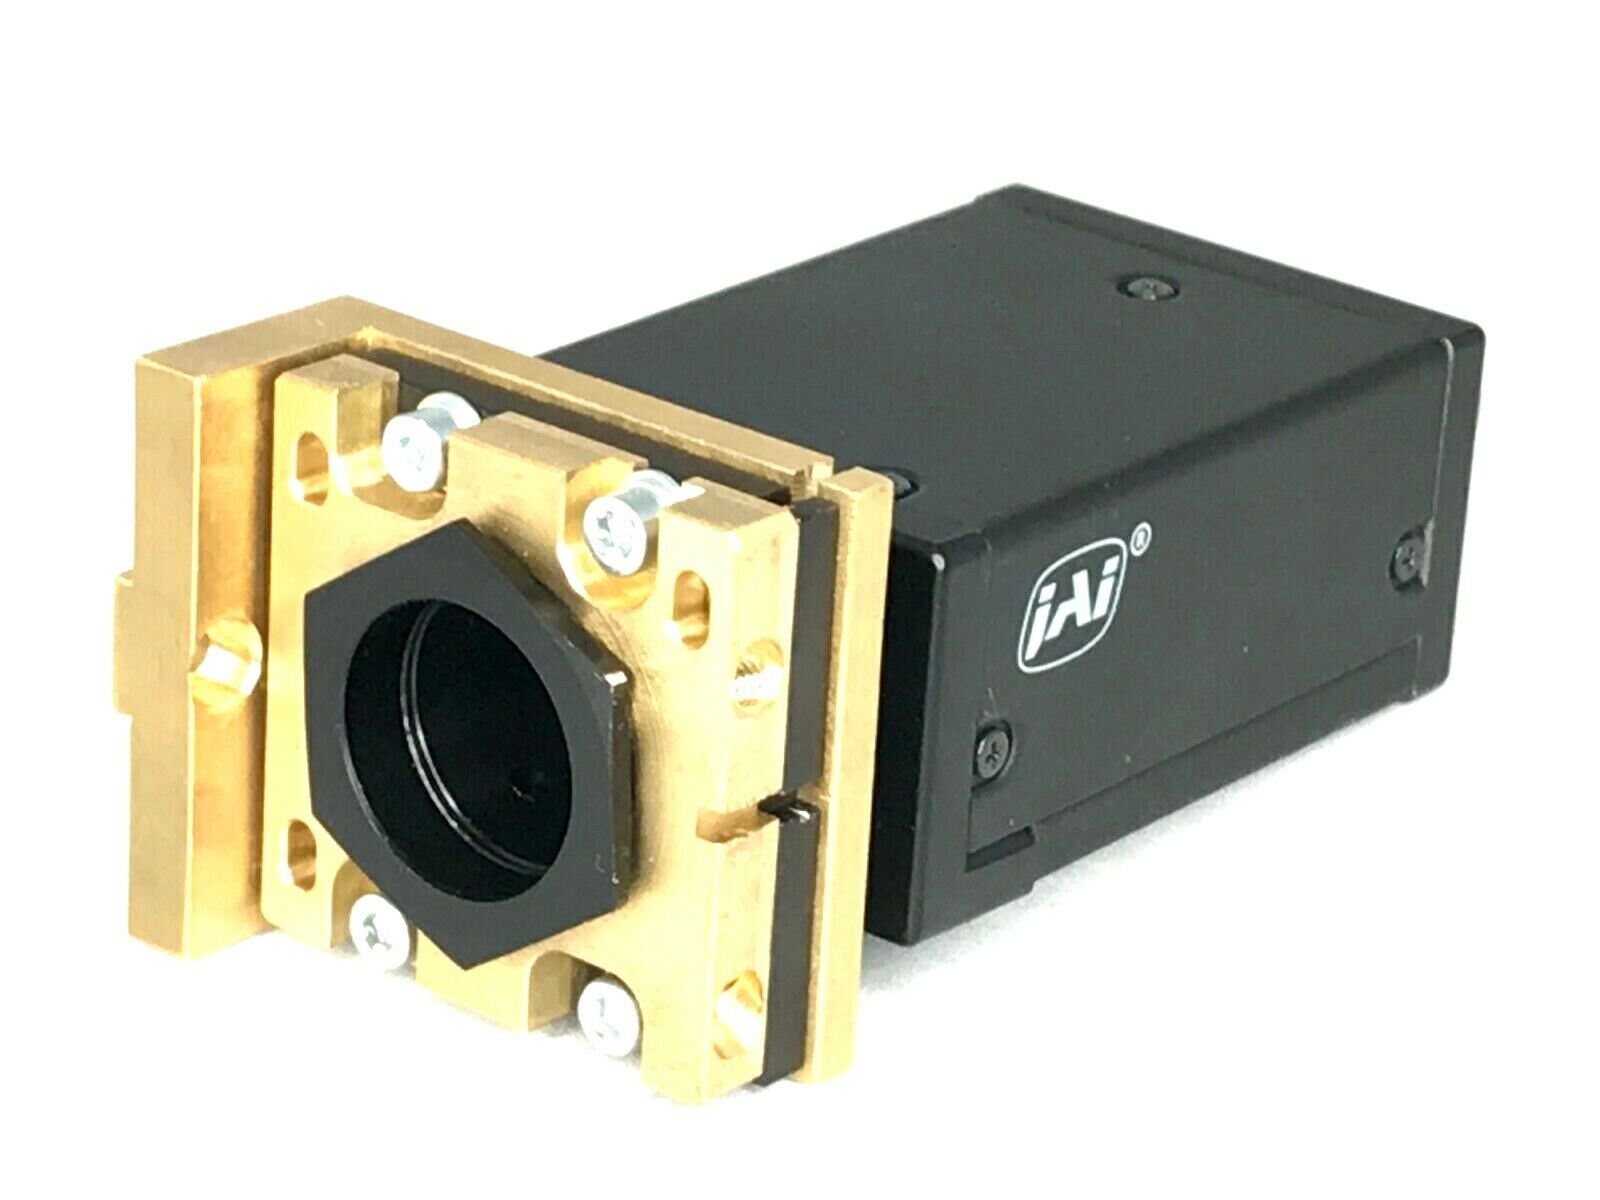 JAI CV-A50IR Near Infrared CCD Camera WITH MOUNT Lightly Used &